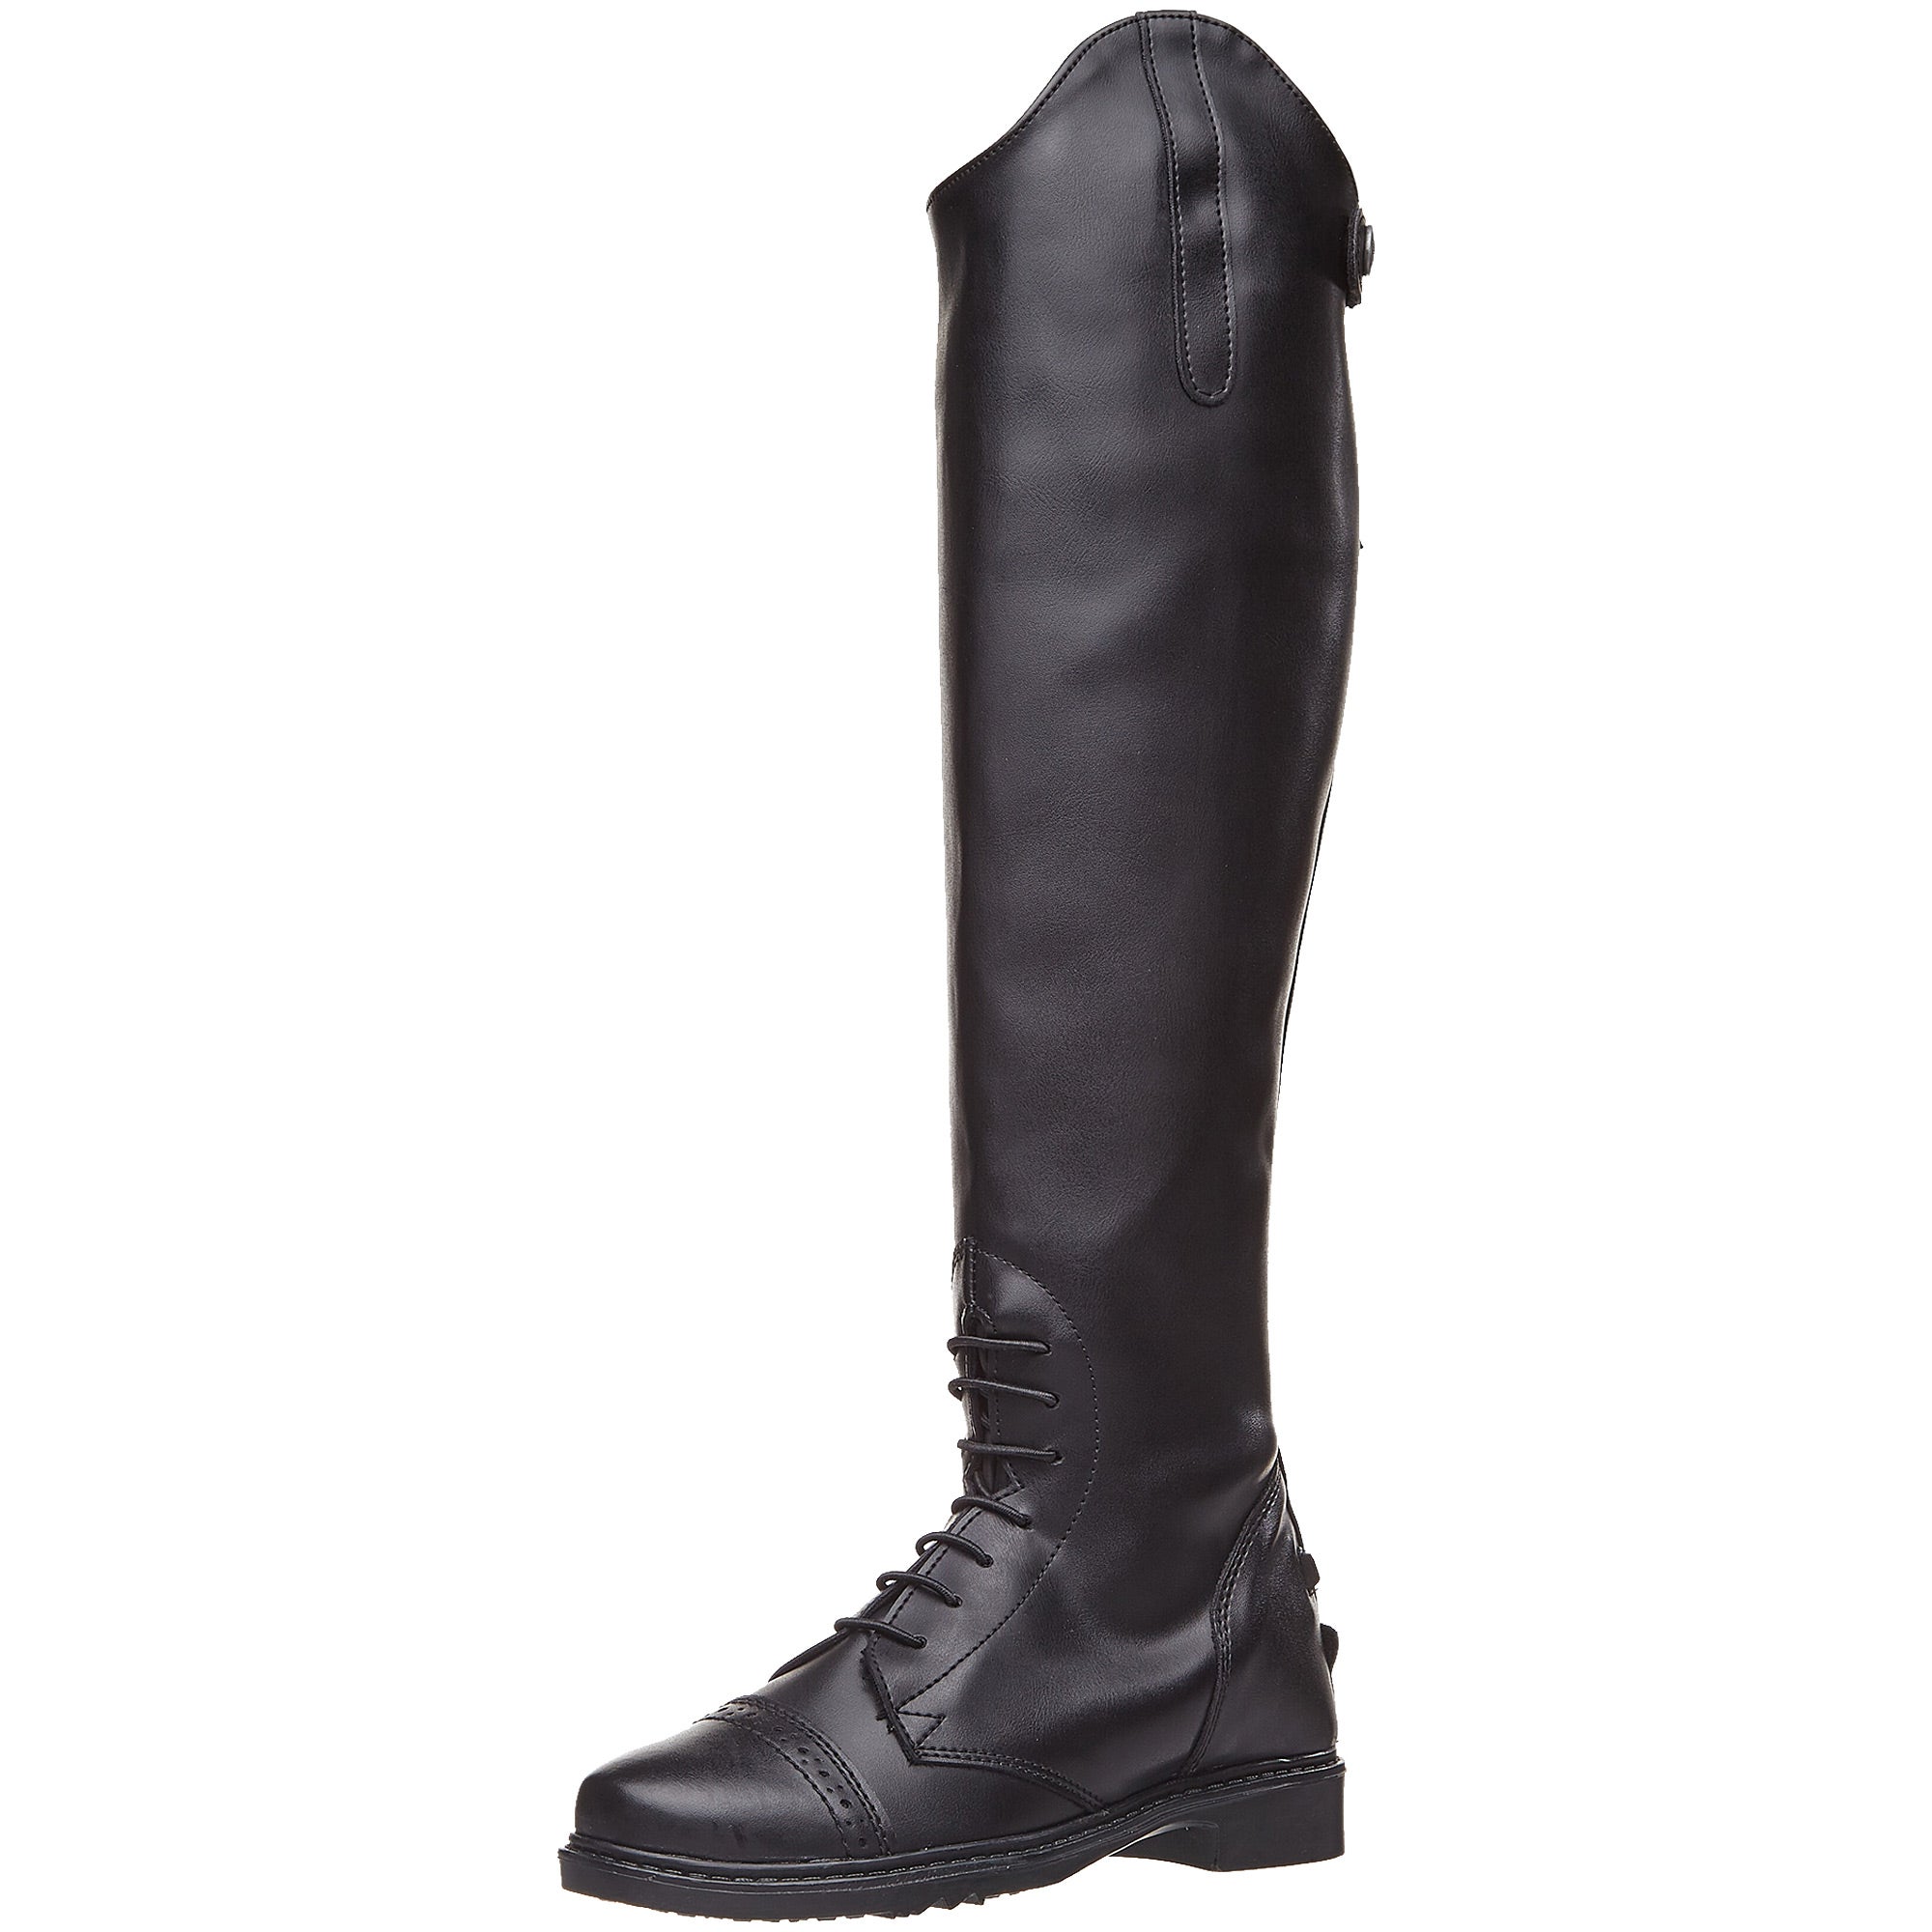 Horka Bonny Ladies Diamante Patent Equi Leather Long Horse Riding Showing Jumping Competition Outdoor Boots Sizes 3-8 